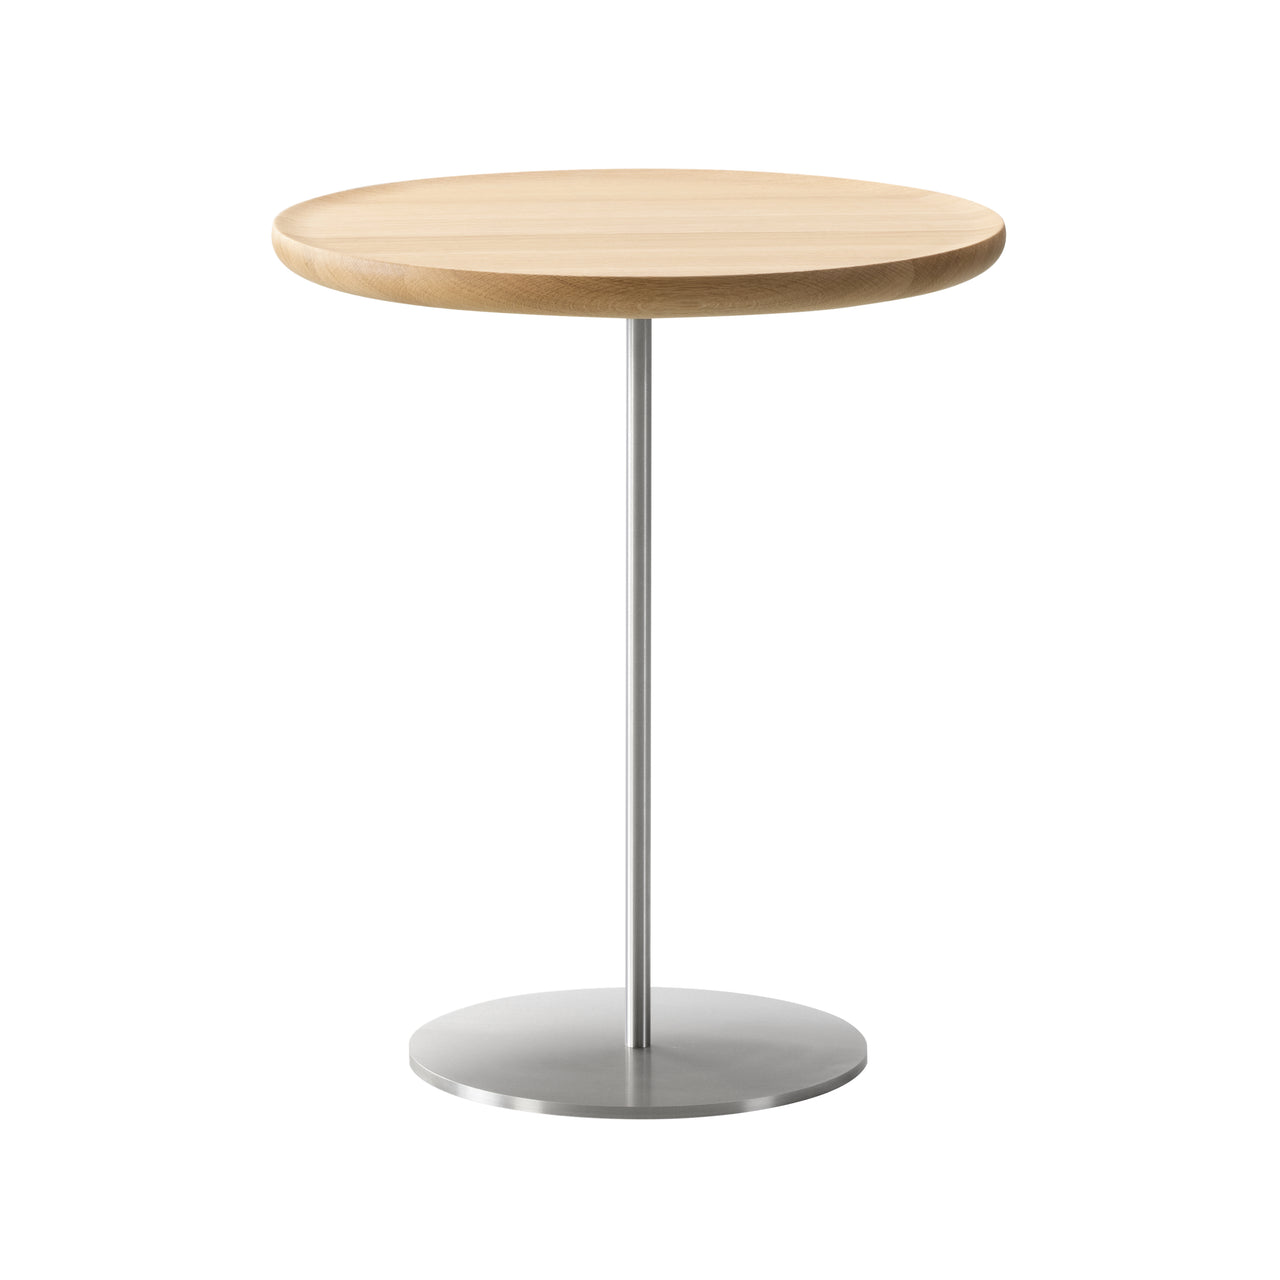 Pal Table: Large + High + Lacquered Oak + Stainless Steel